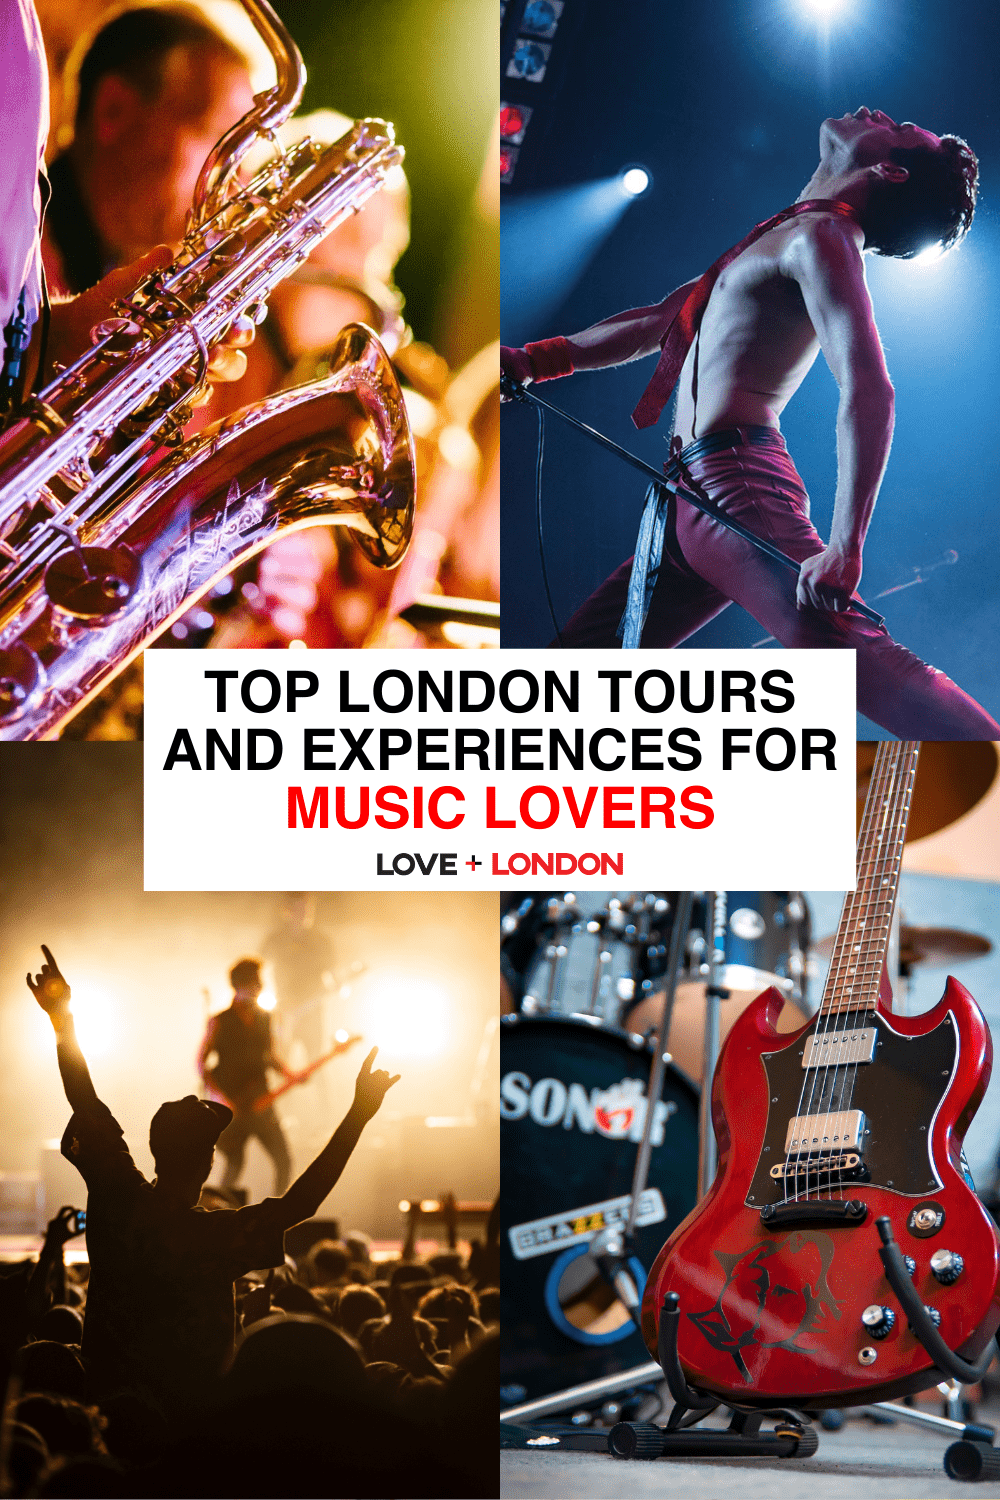 op London Tours and Experiences for Music Lovers